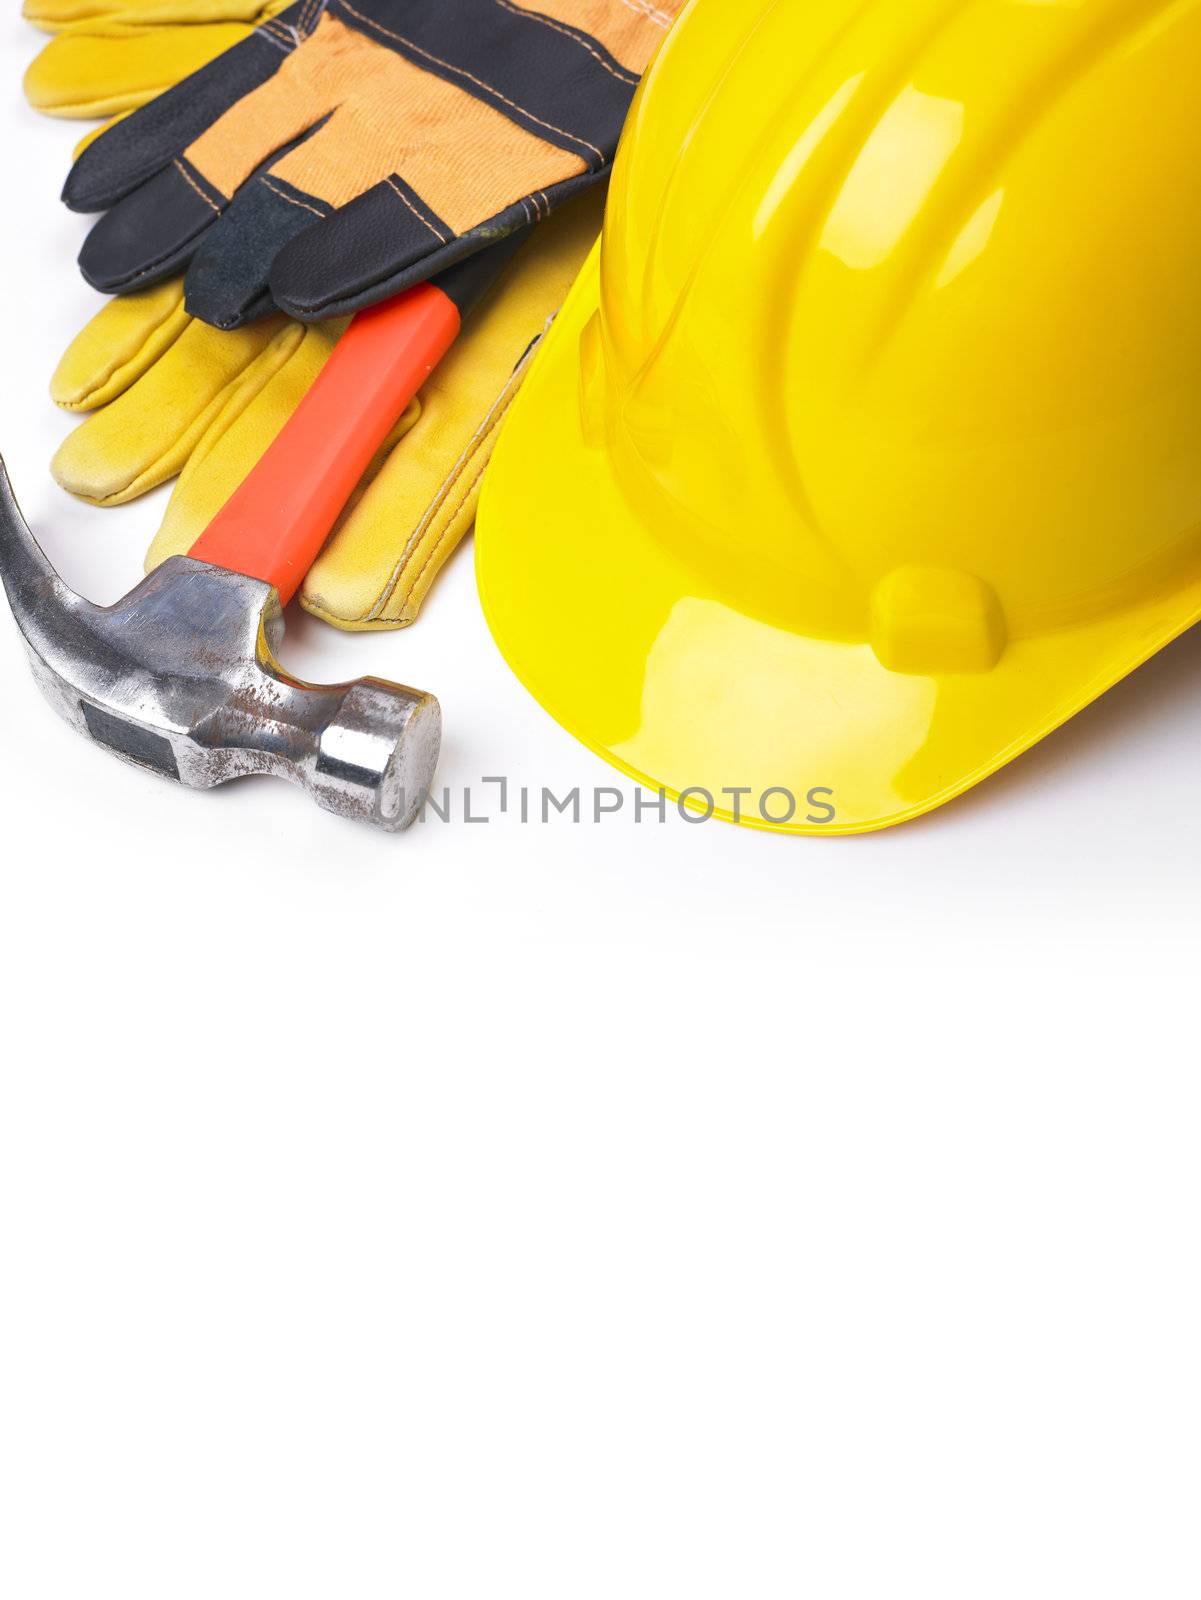 HardHat Hammer And Leather Gloves on white